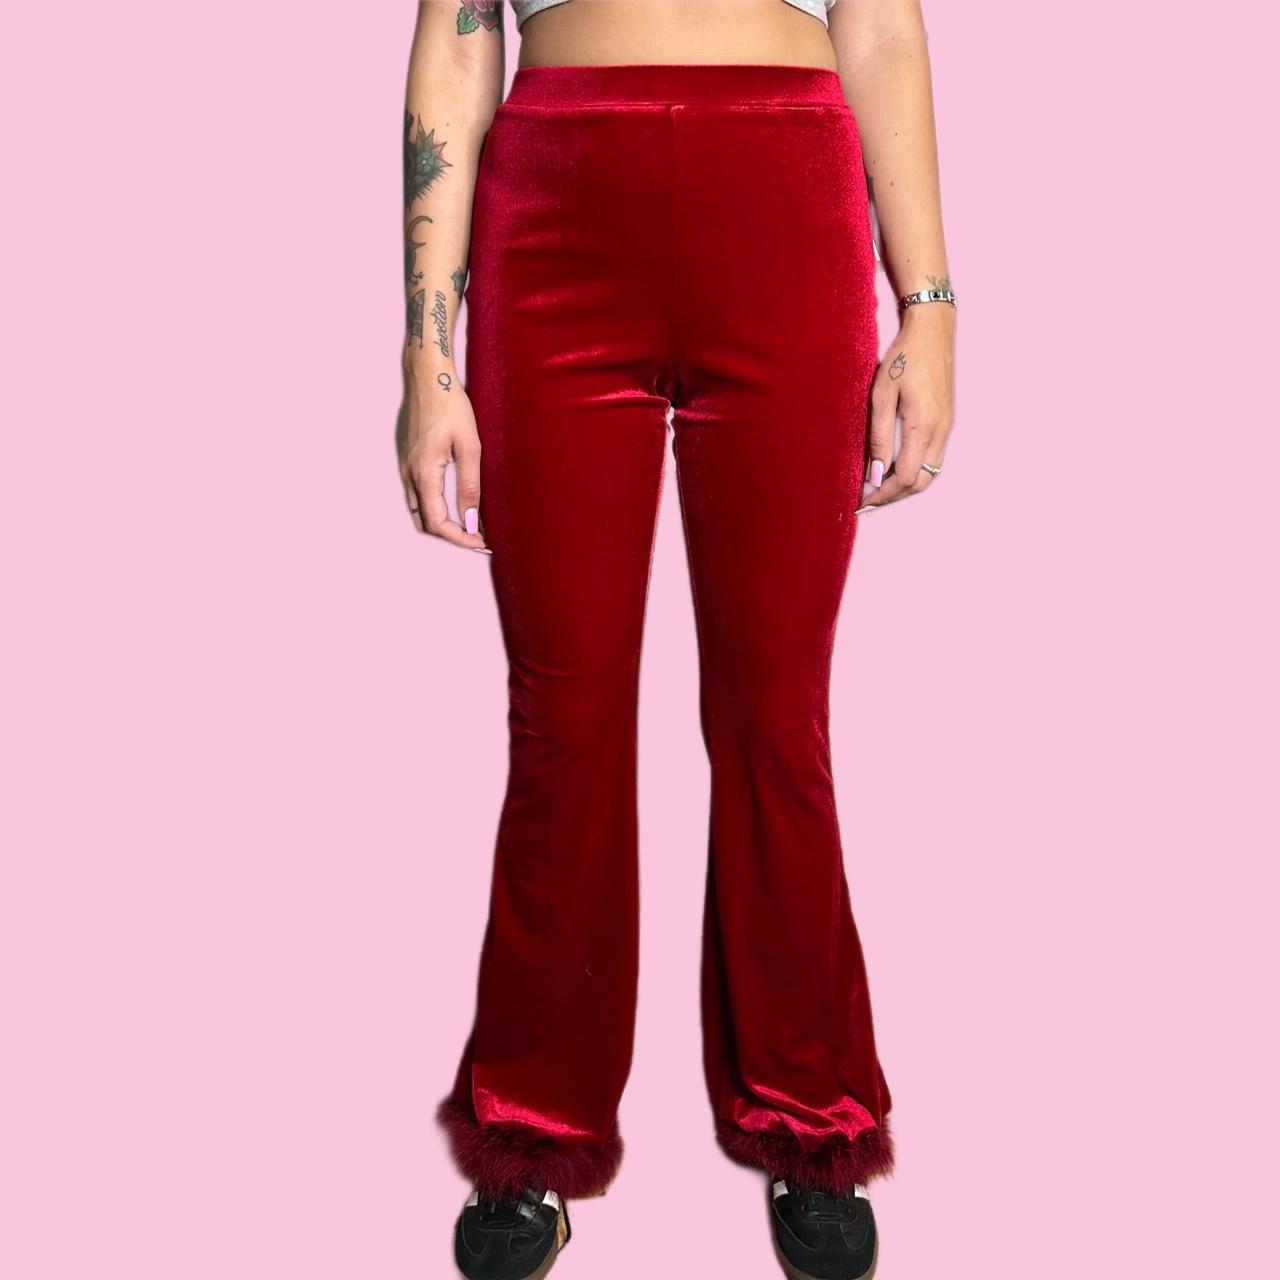 red flare yoga pants - size medium - great condition - Depop